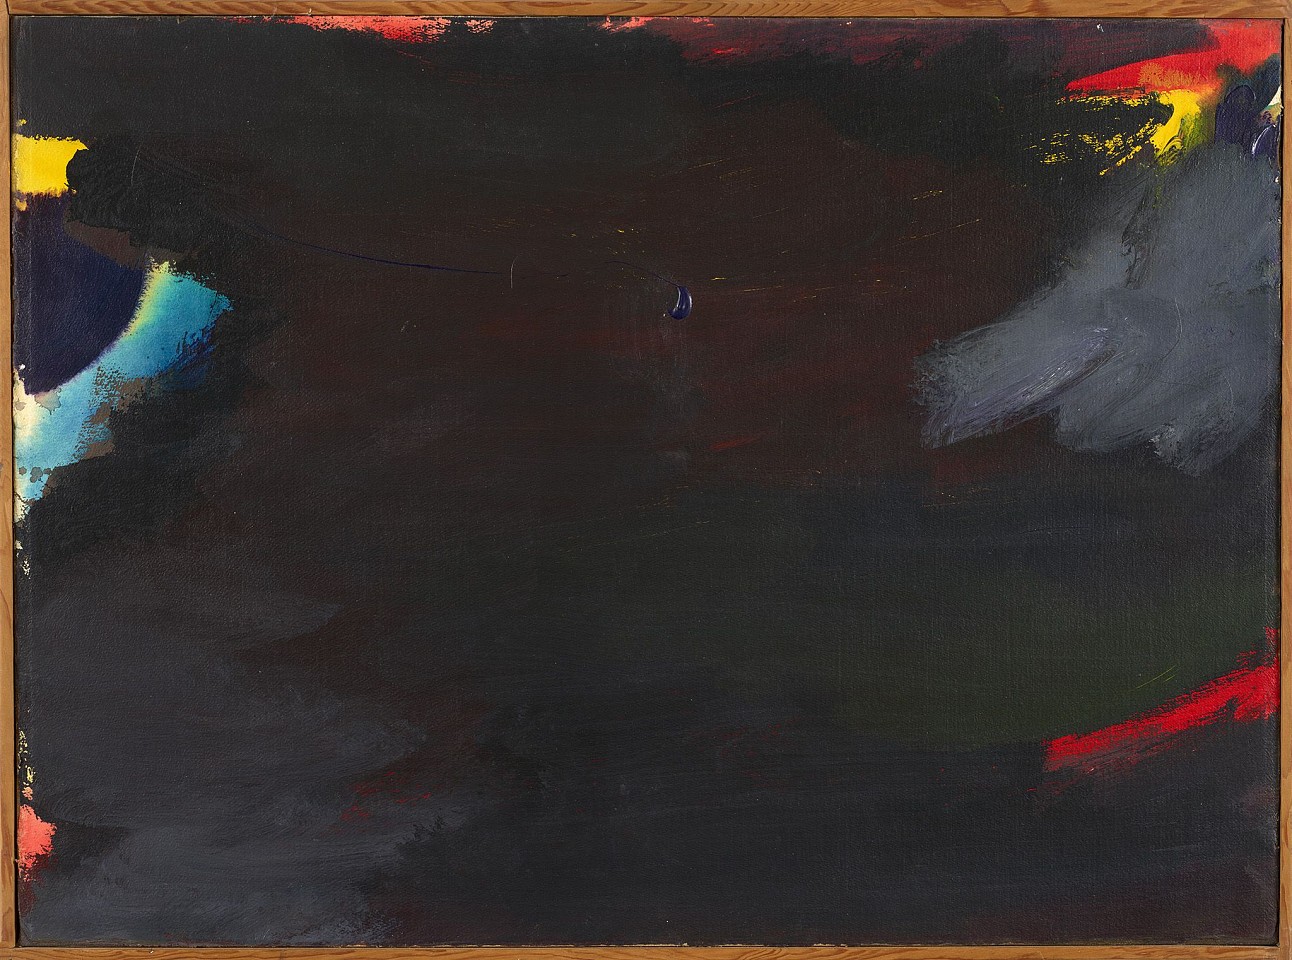 Frederick J. Brown, Peace, 1976
Oil on linen, 22 x 30 1/4 in. (55.9 x 76.8 cm)
BROW-00085